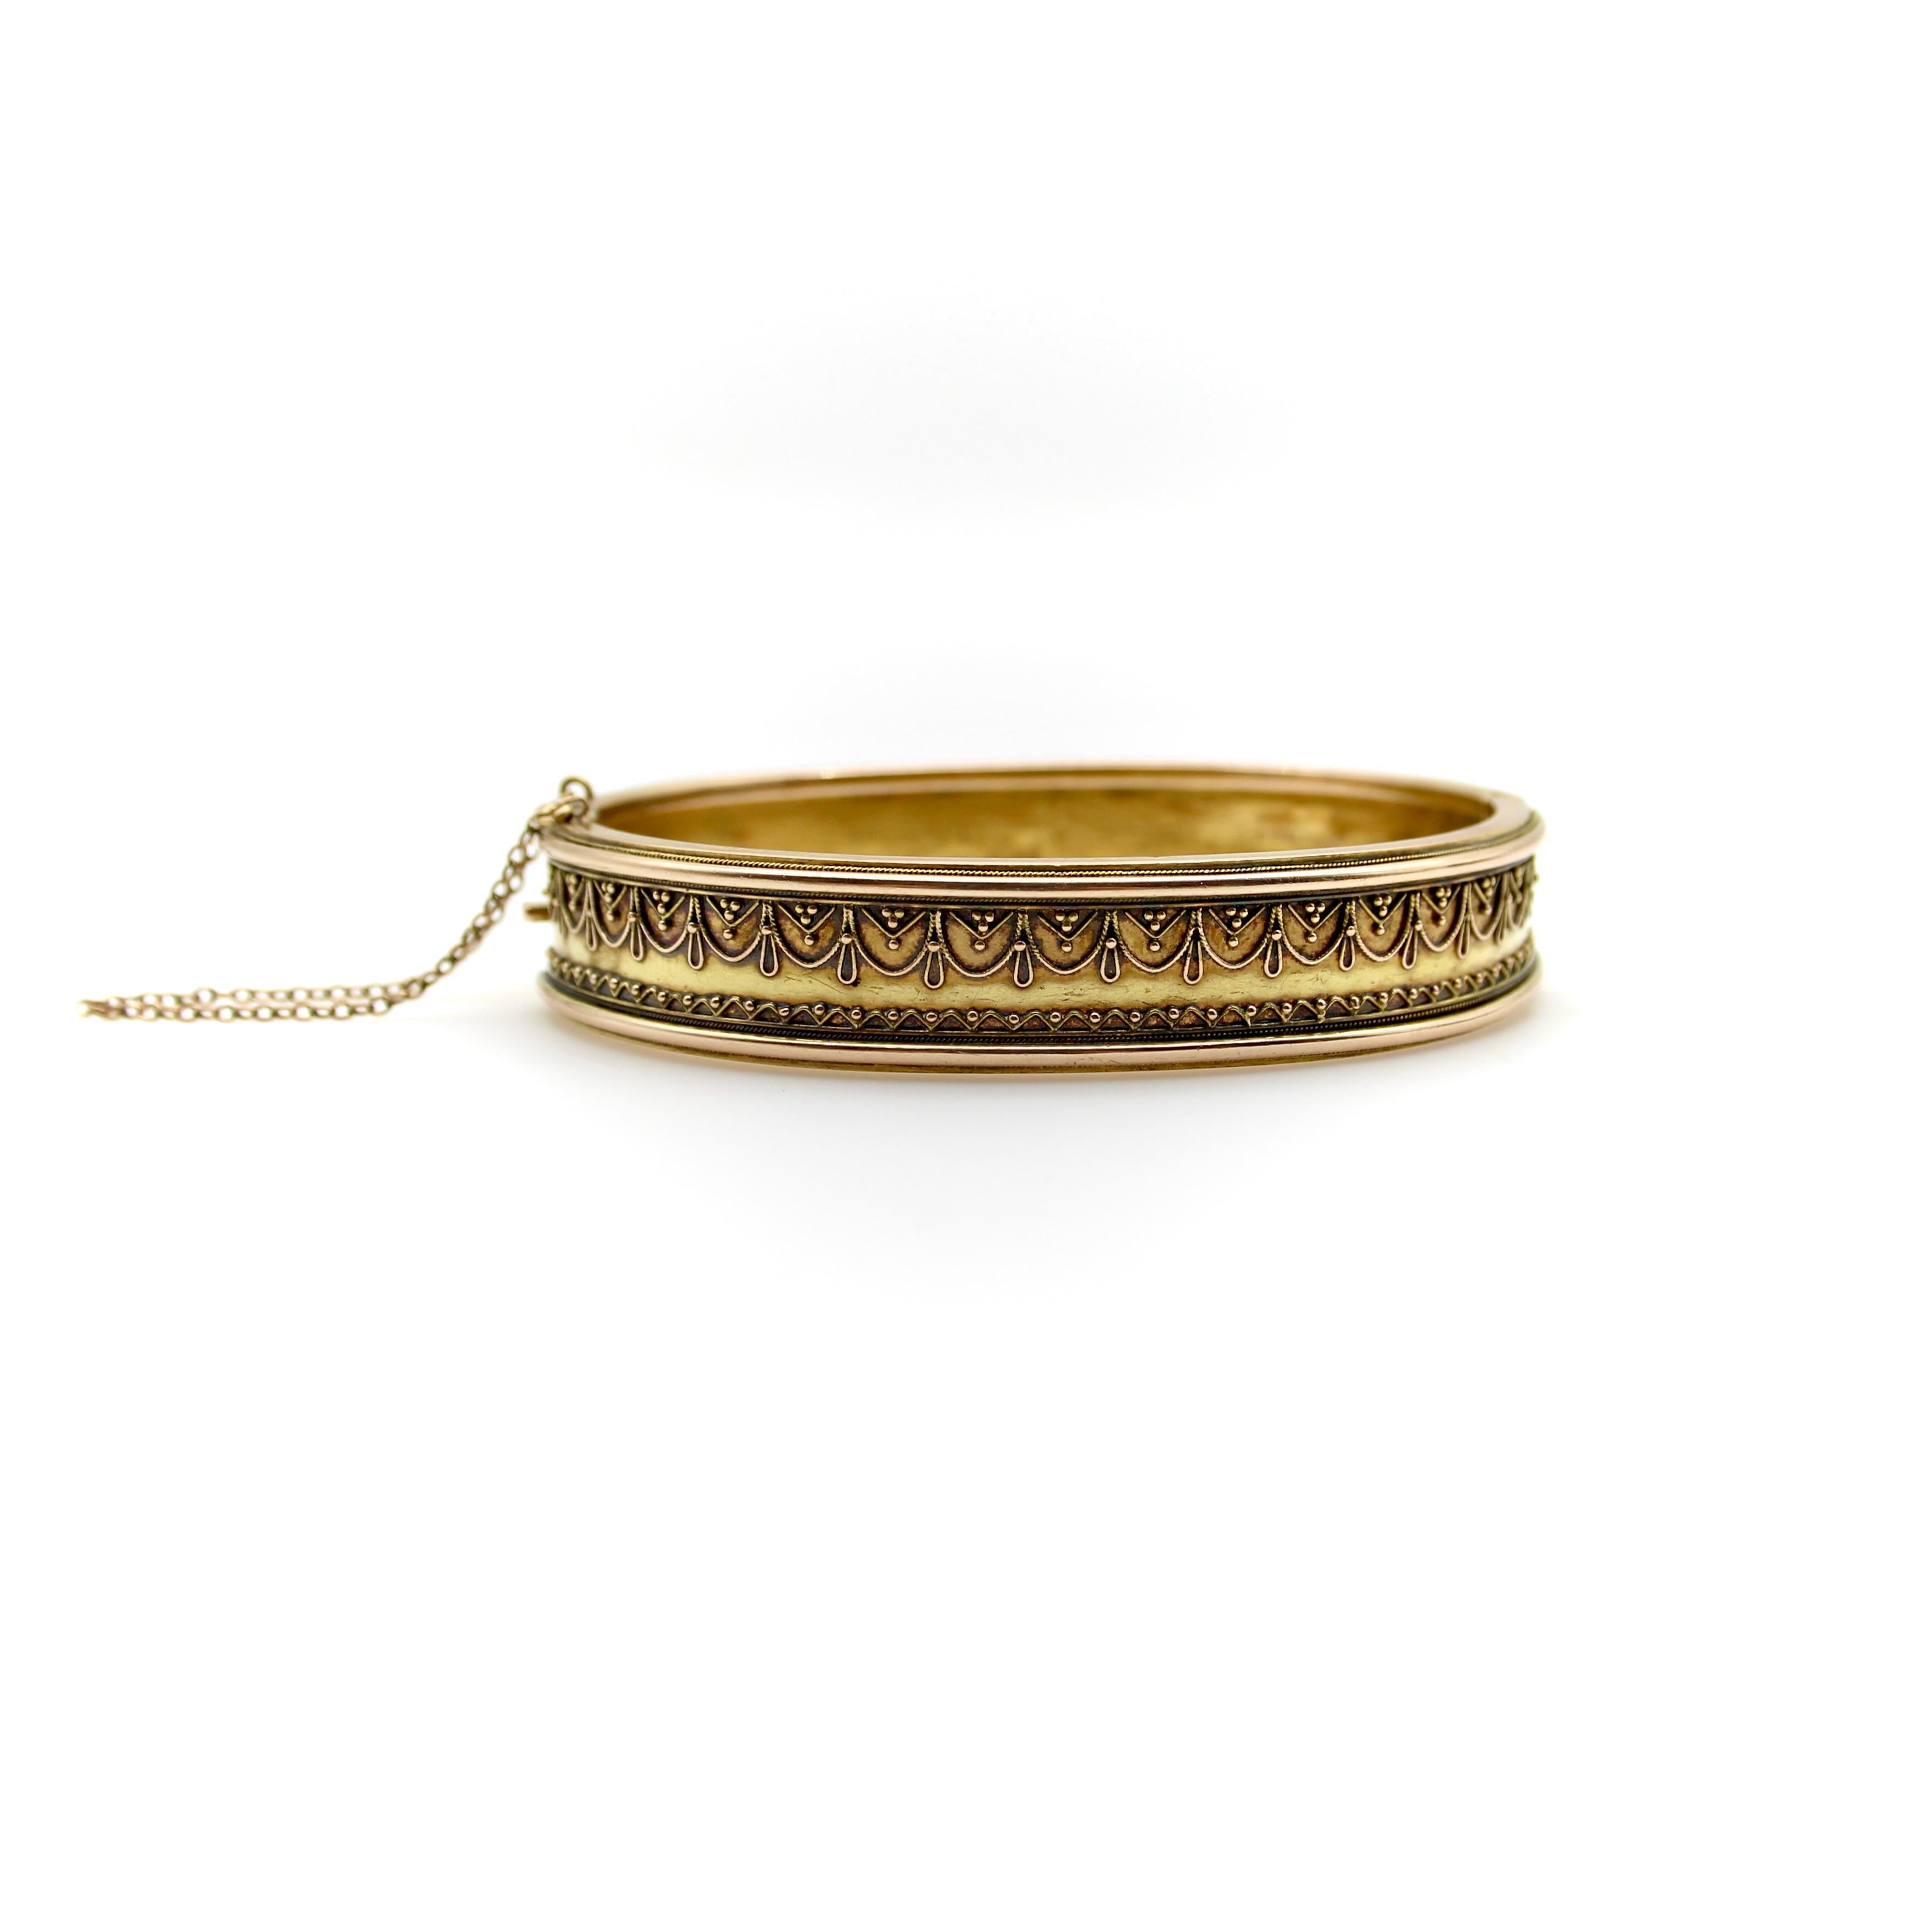 This 15k gold Etruscan Revival Bracelet has delicate cannetille work done by hand. The twisted wire and granulation create a lacy pattern of swooping rope—opposite a zigzag pattern—dotted with tiny granulated balls for an added level of intricacy.